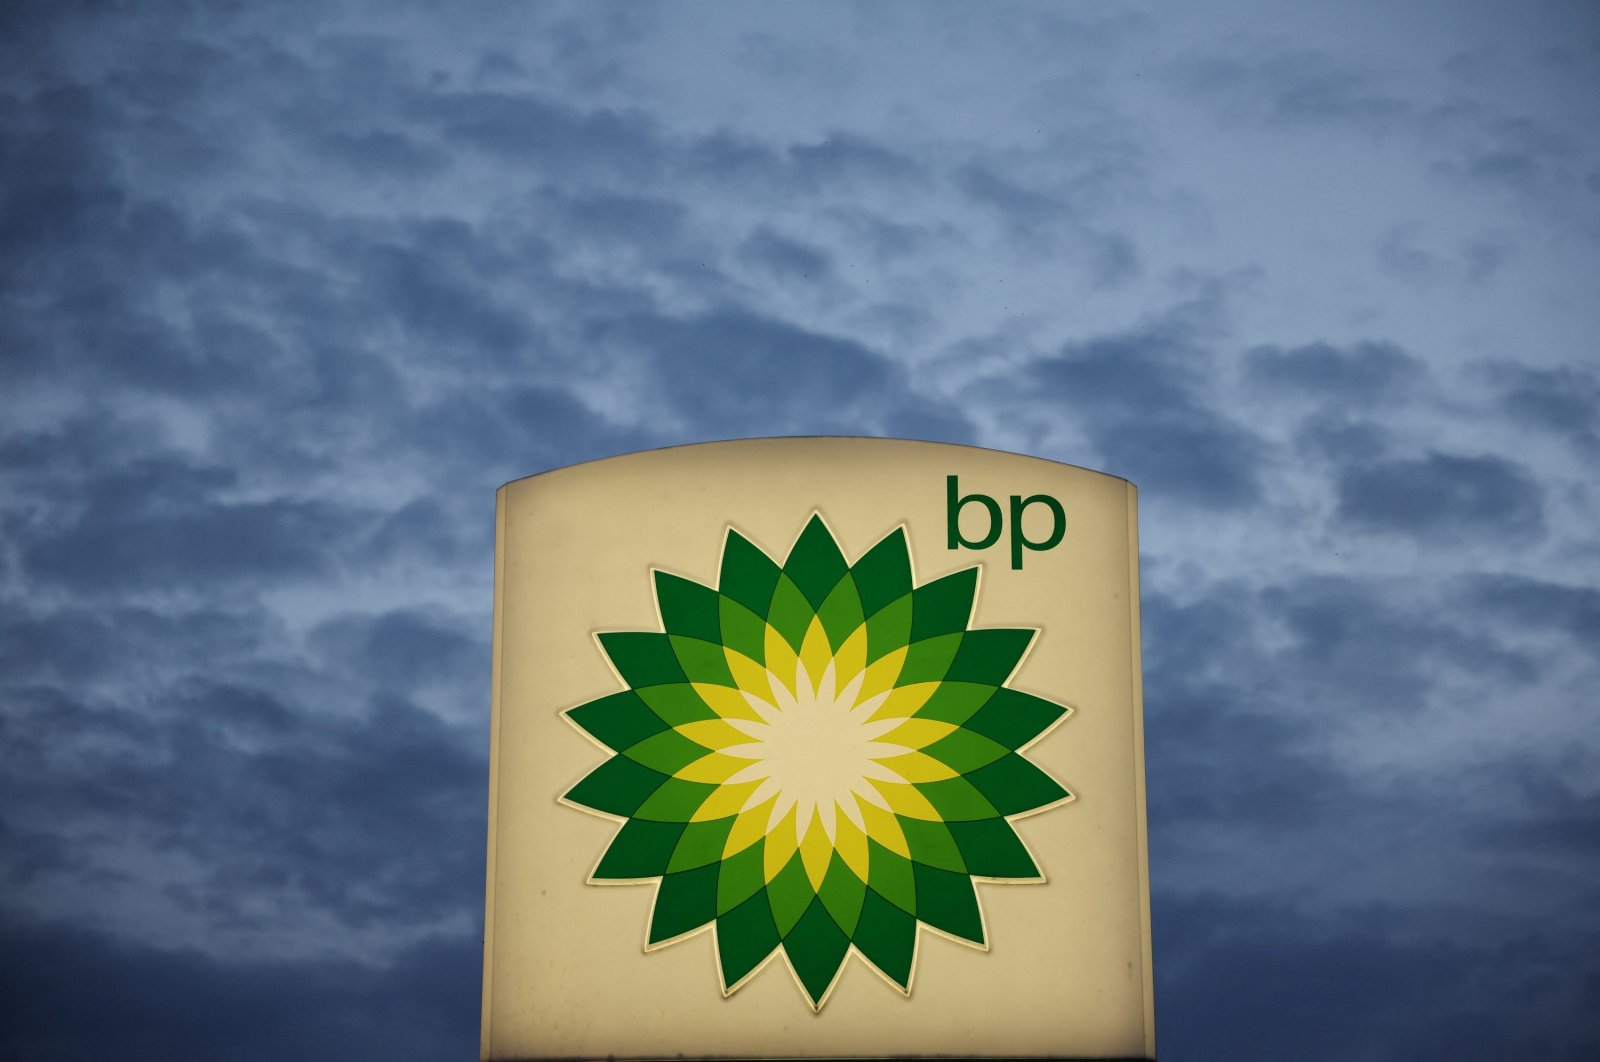 The logo of British Petroleum BP is seen at a petrol station in Pienkow, Poland, June 8, 2022. (Reuters Photo)